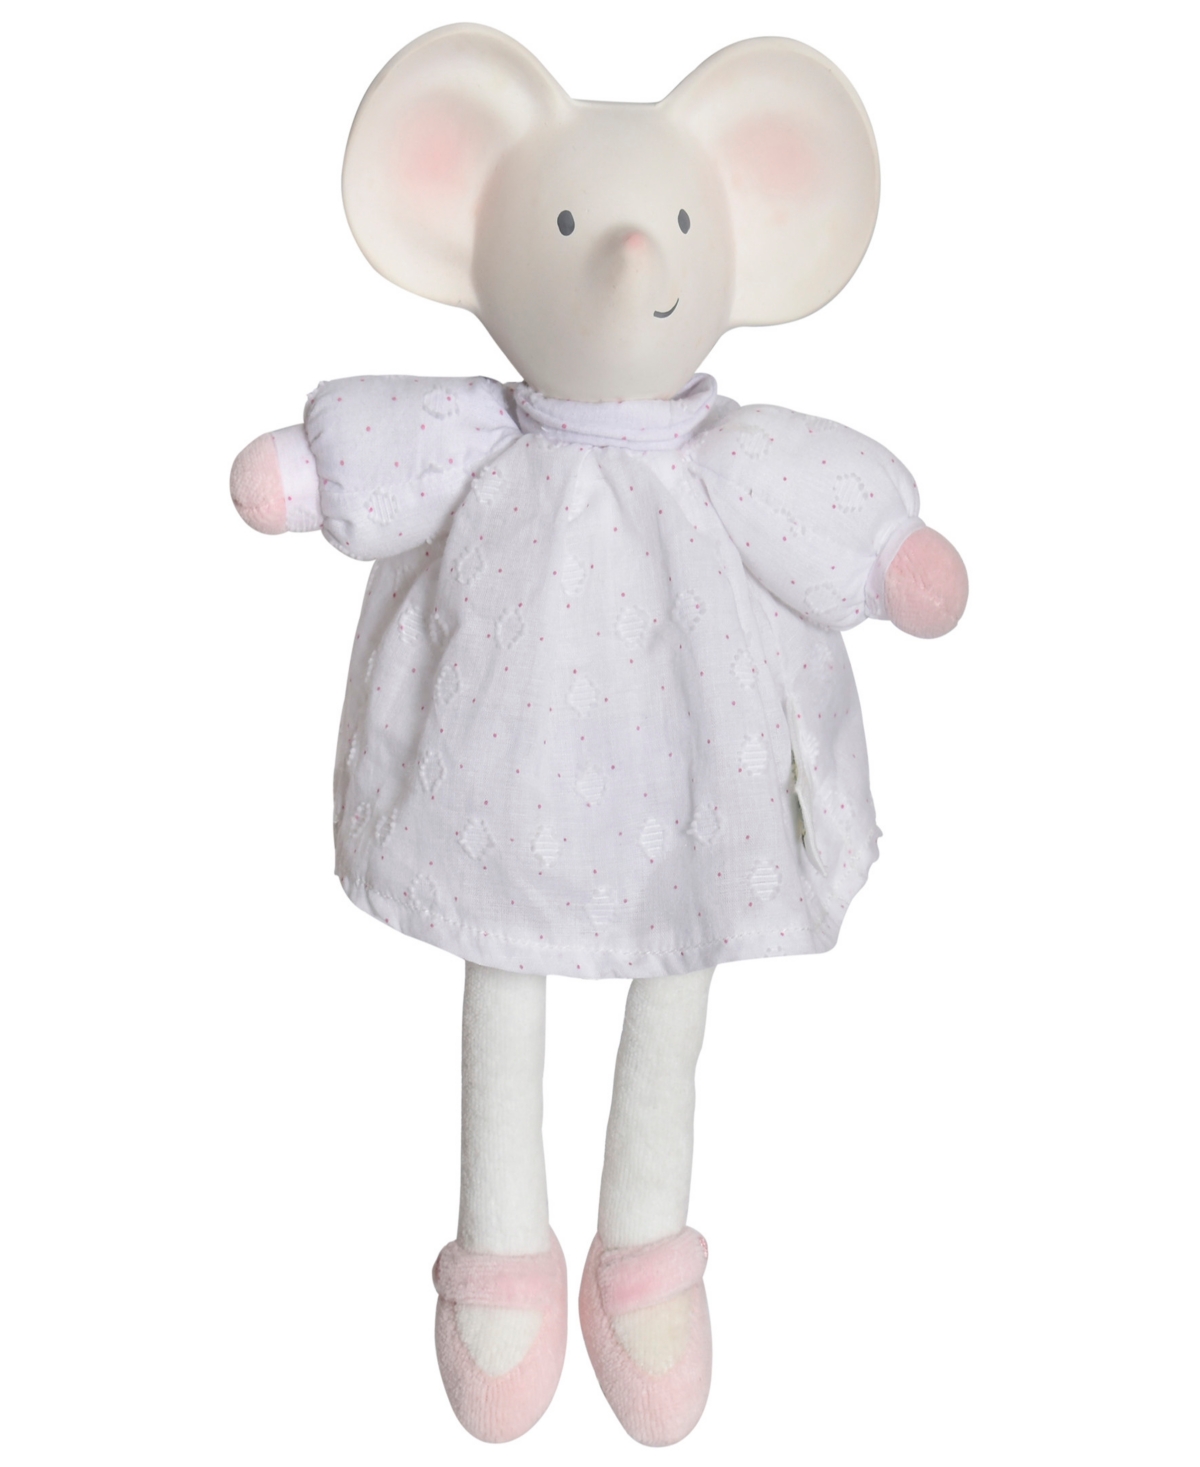 Meiya Alvin Babies' Tikiri Toys Meiya The Mouse Soft Fabric Bodied Doll With Rubber Head Toy, Great For Teething In Multi